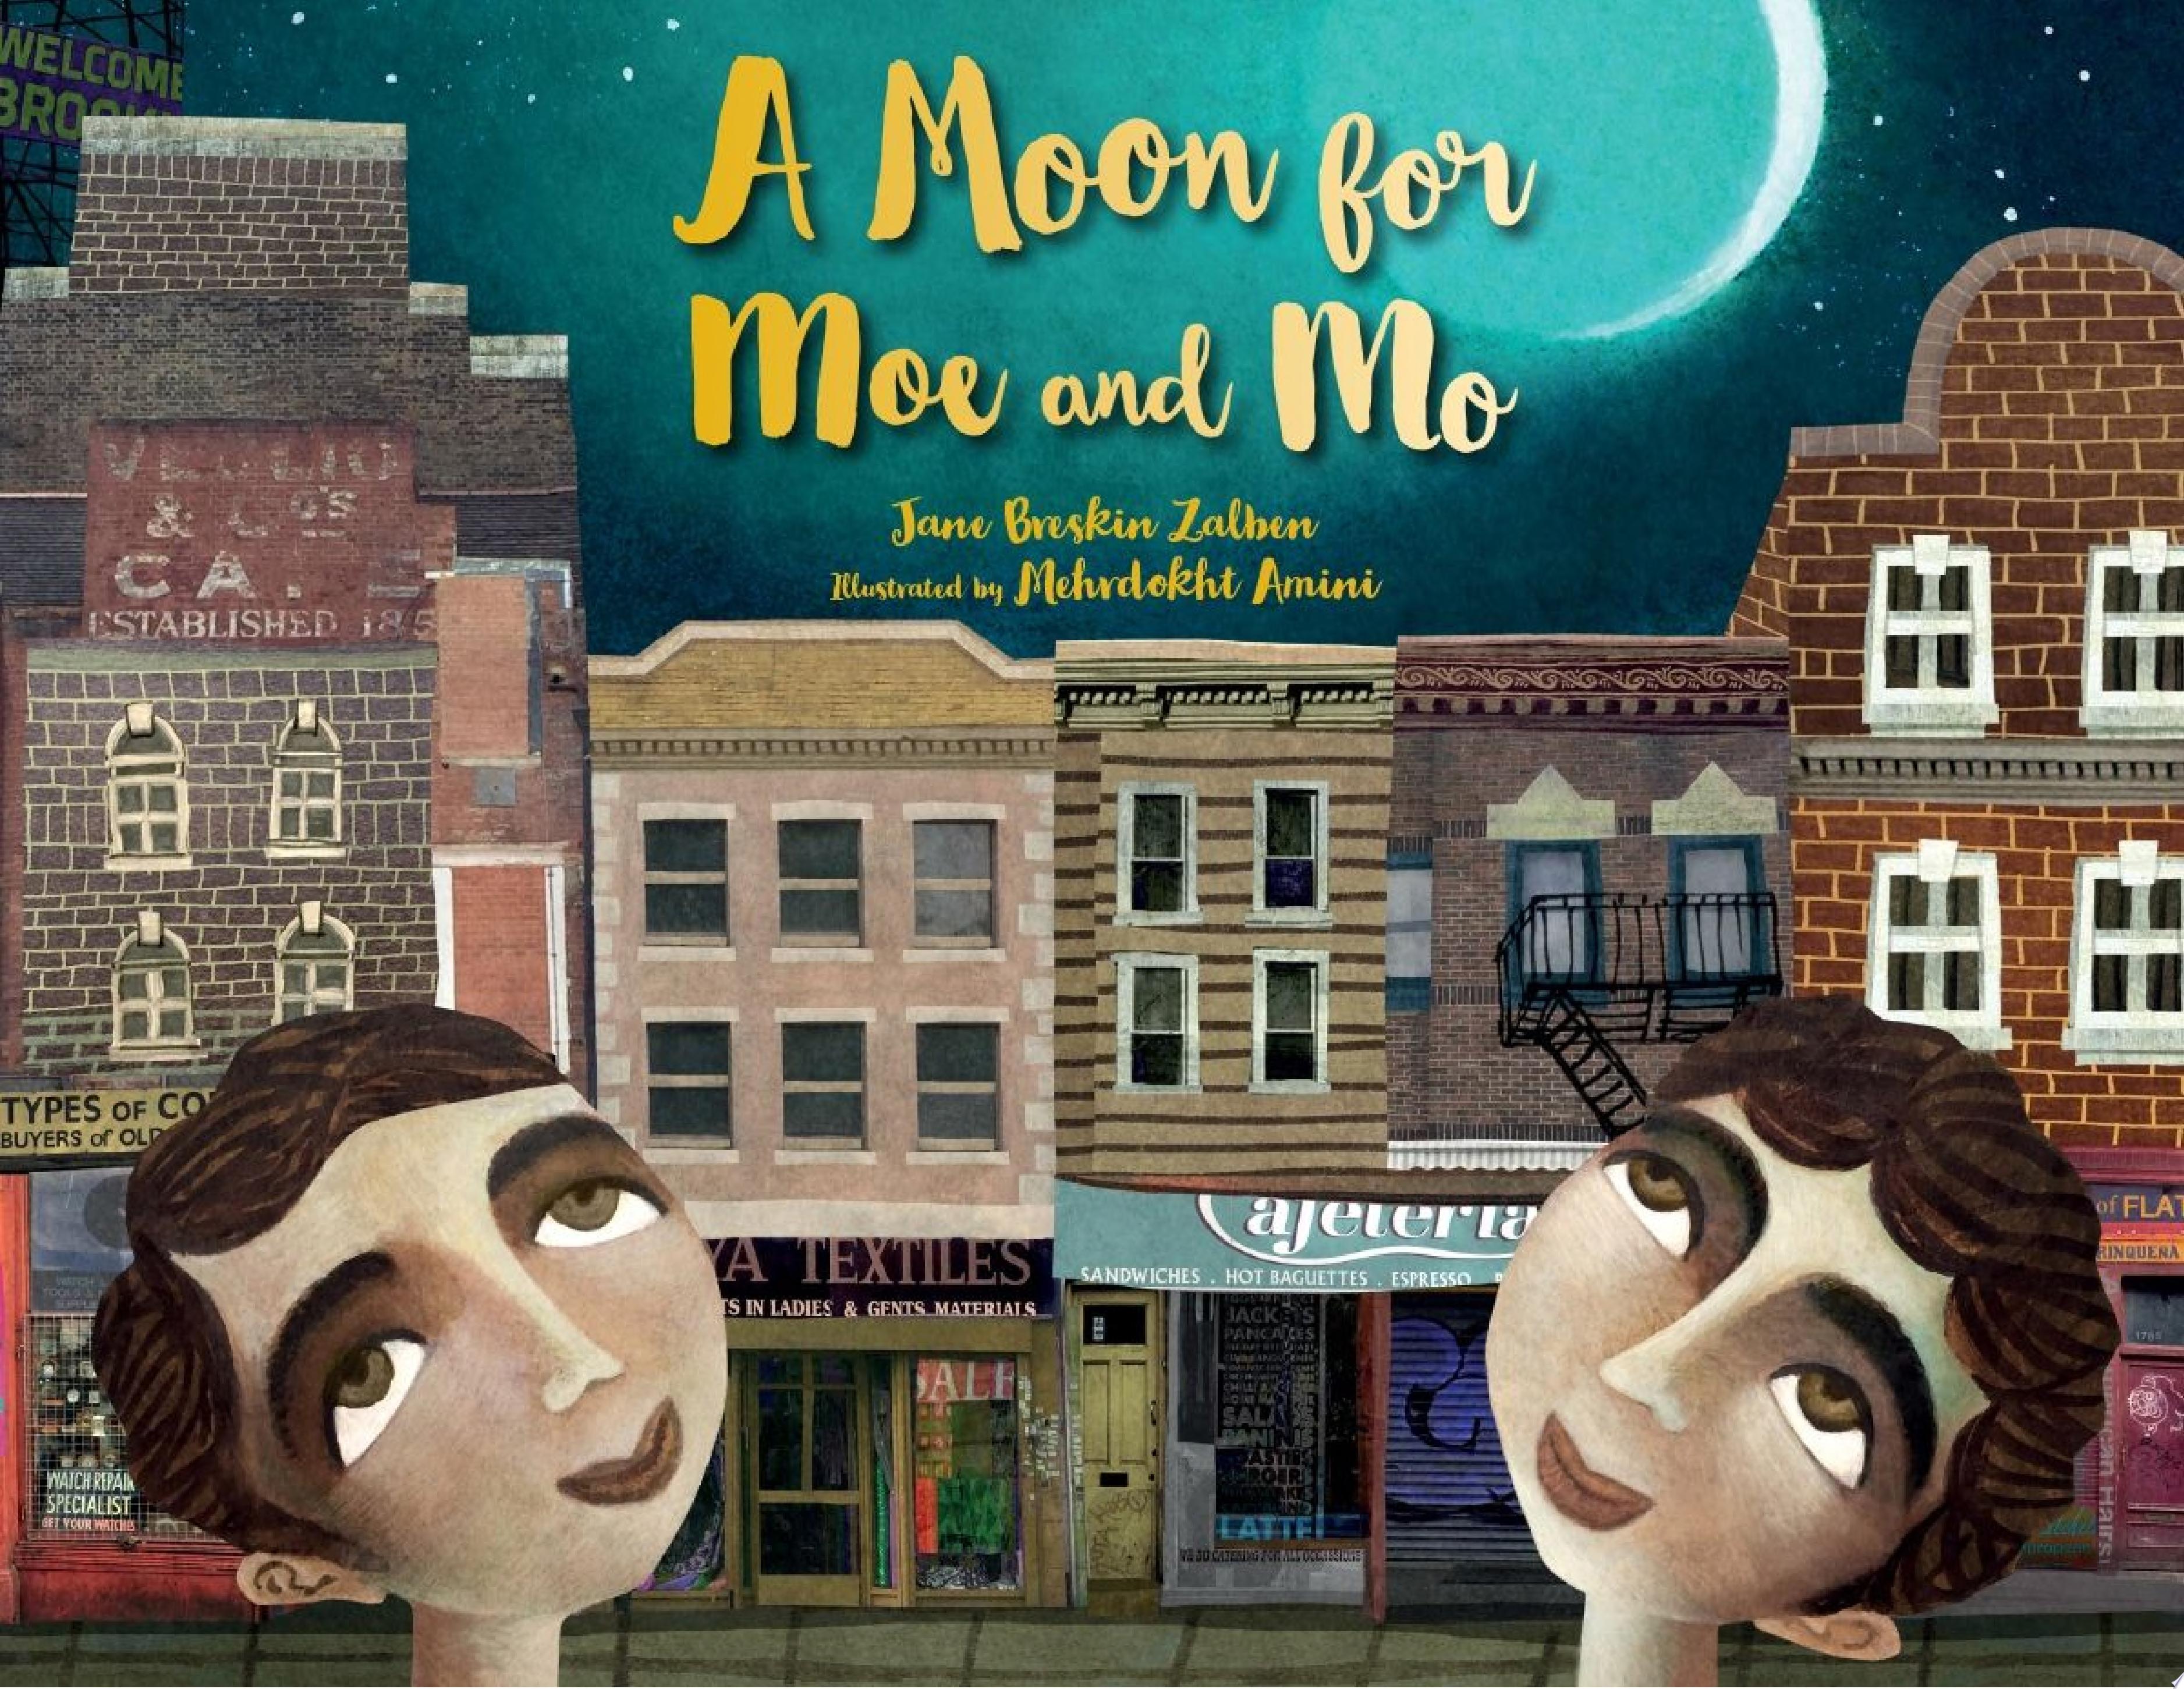 Image for "A Moon for Moe and Mo"